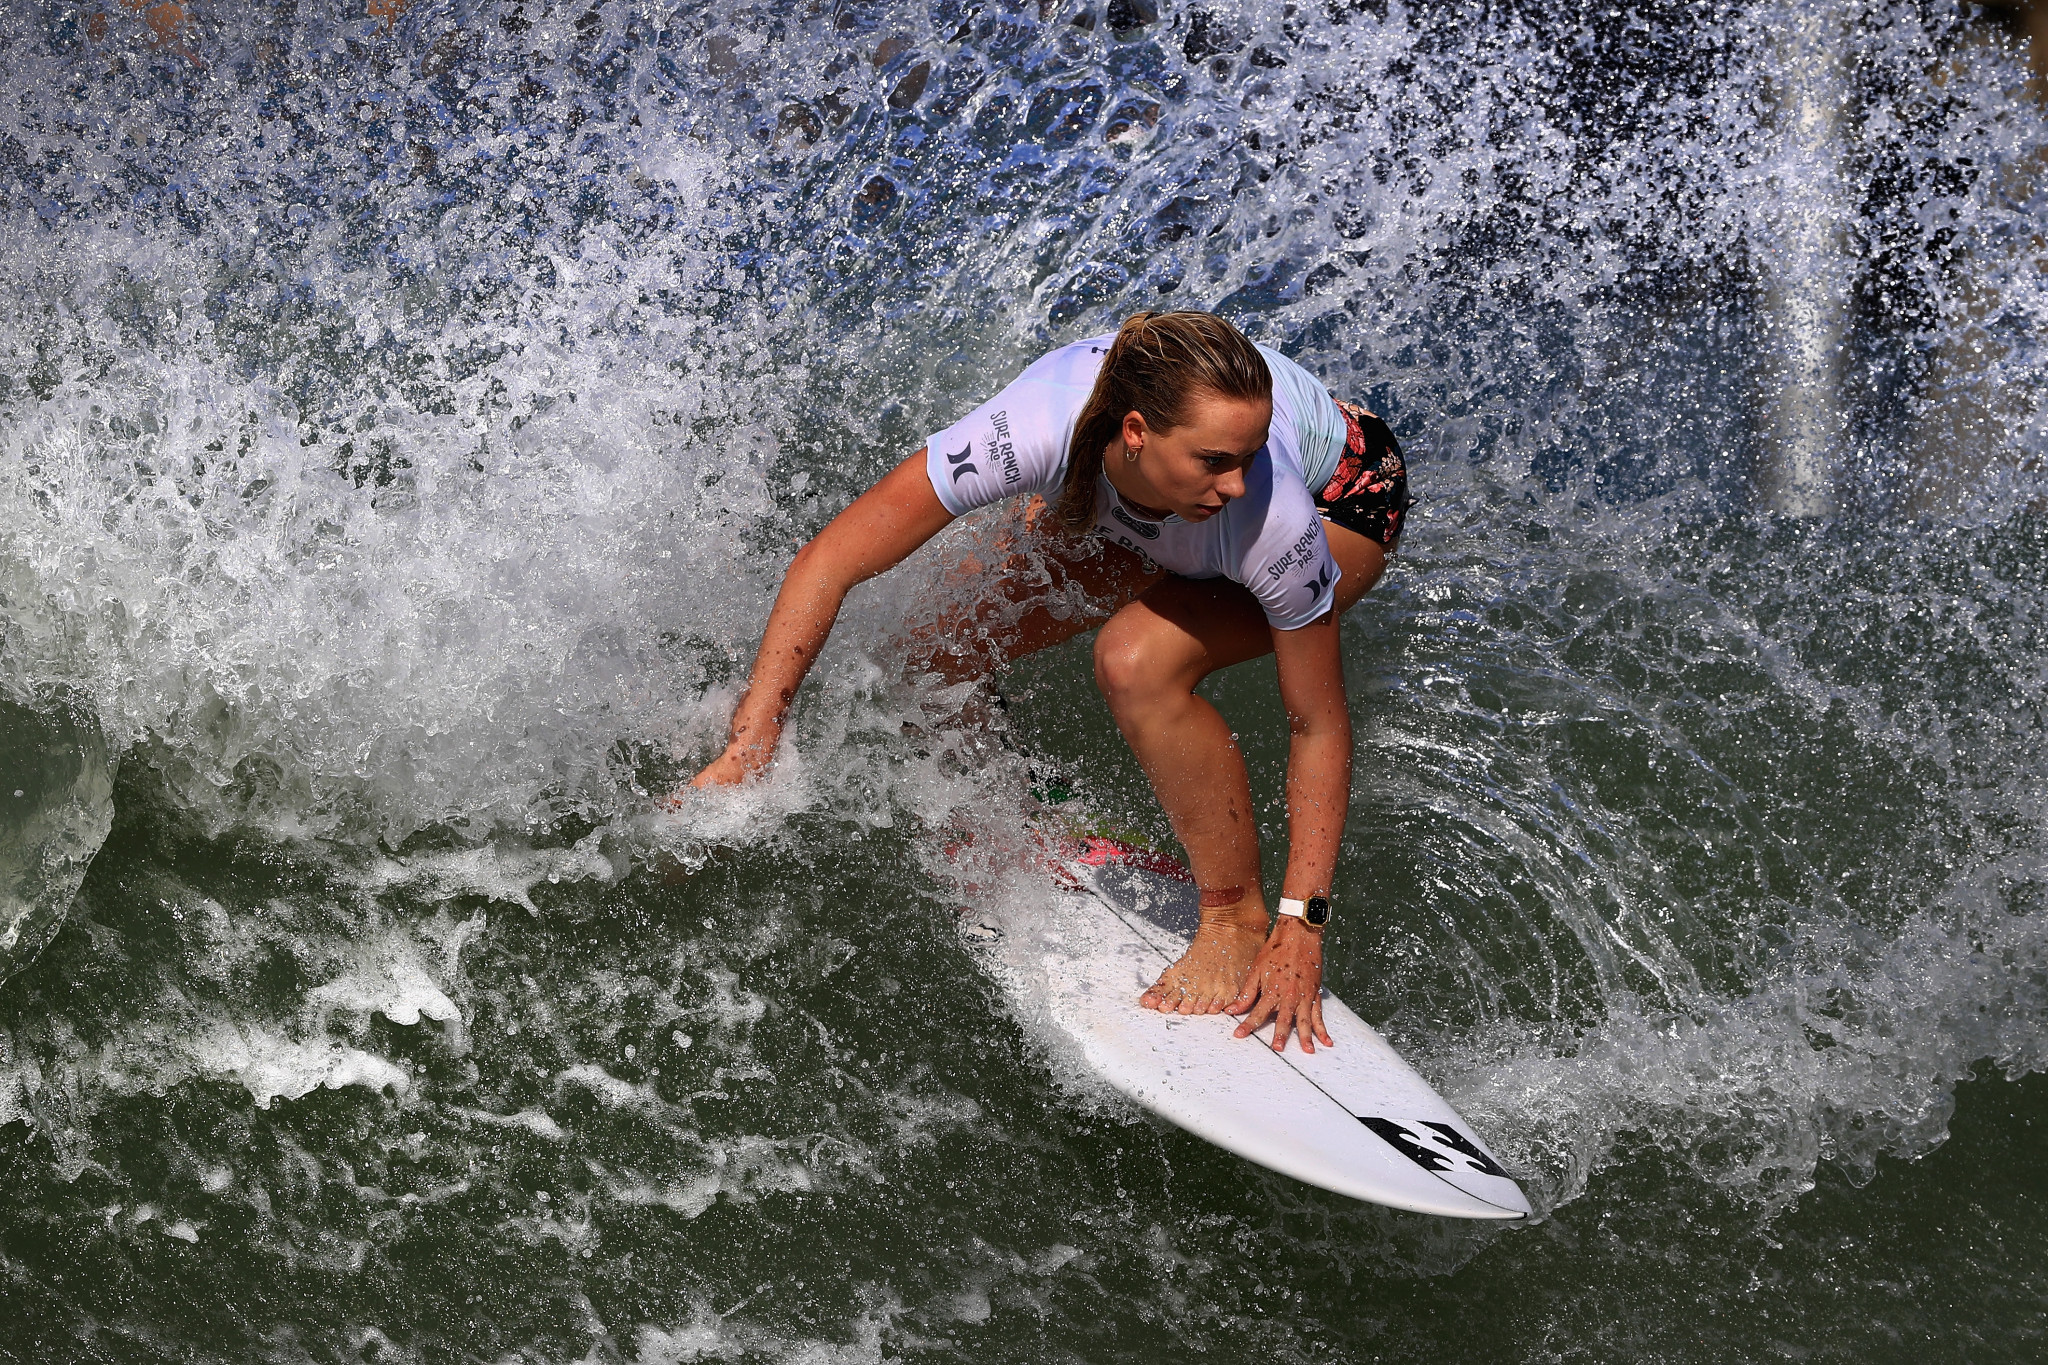 Surfing named official sport of California as it looks to secure long-term Olympic inclusion